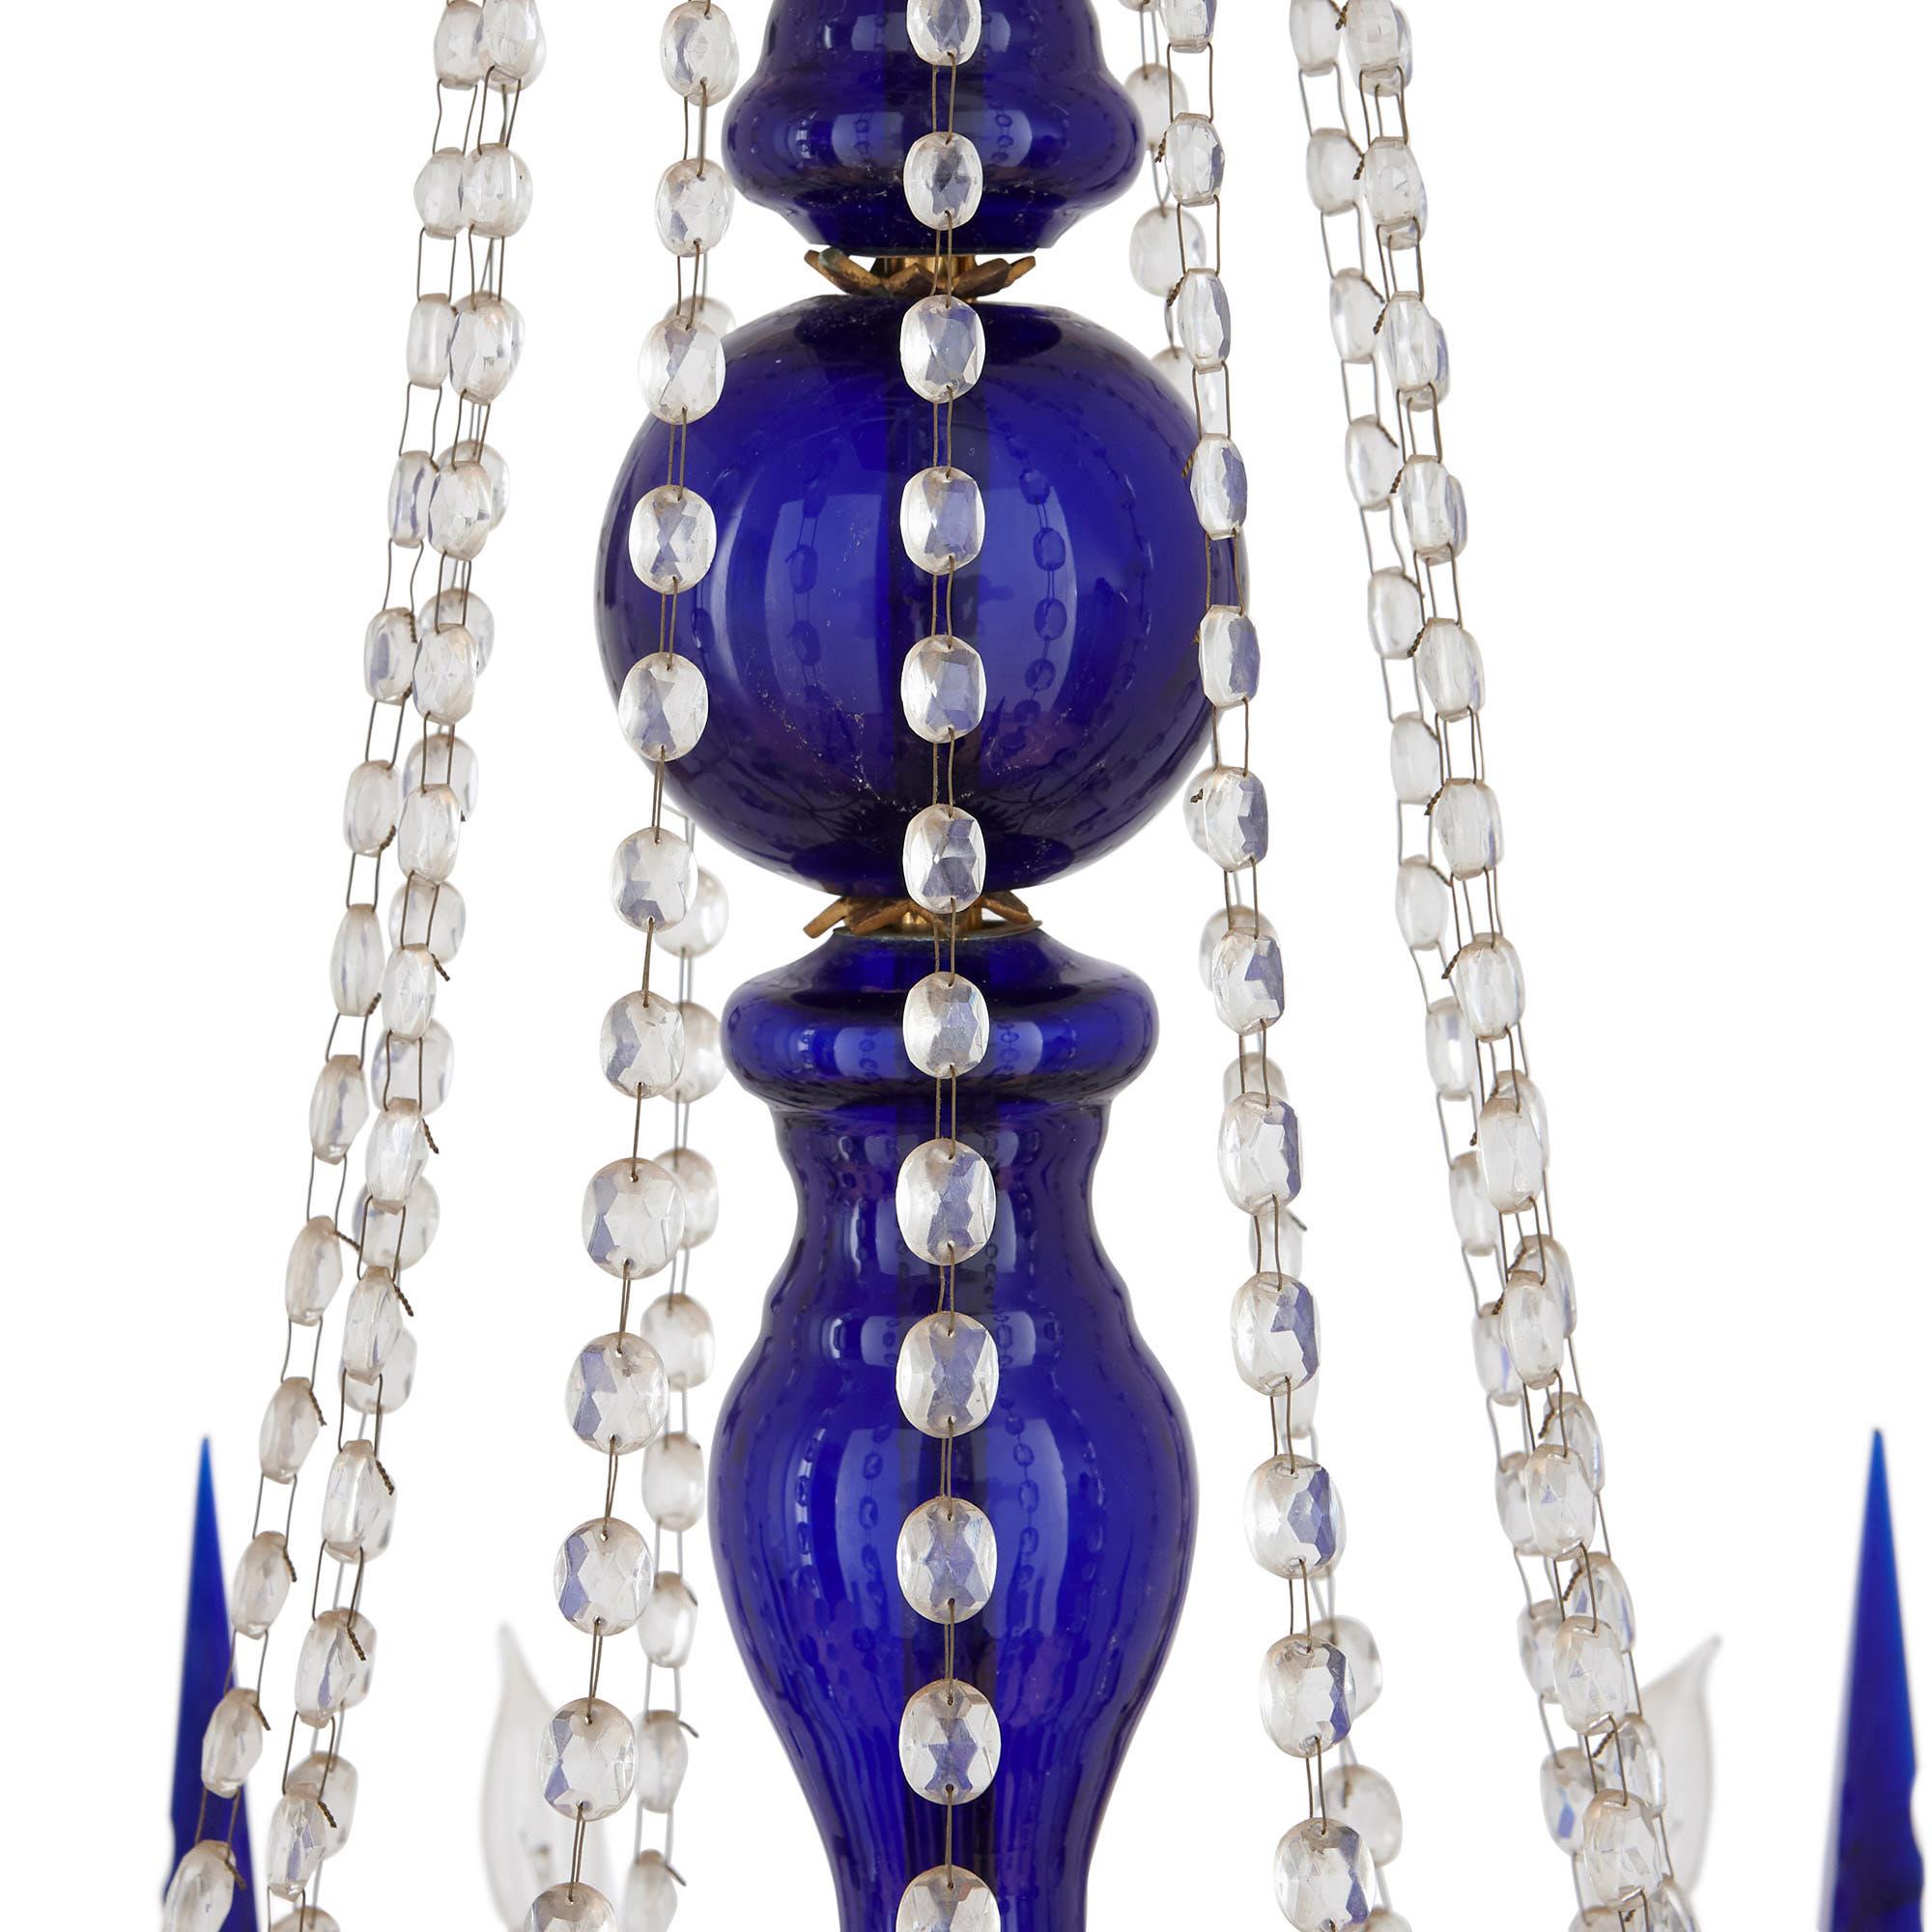 This magnificent chandelier is composed of a variety of media, which beautifully contrast in their colour and qualities. This includes lustrous golden gilt bronze (ormolu), cut clear glass, and smooth cobalt blue glass. The chandelier will make a